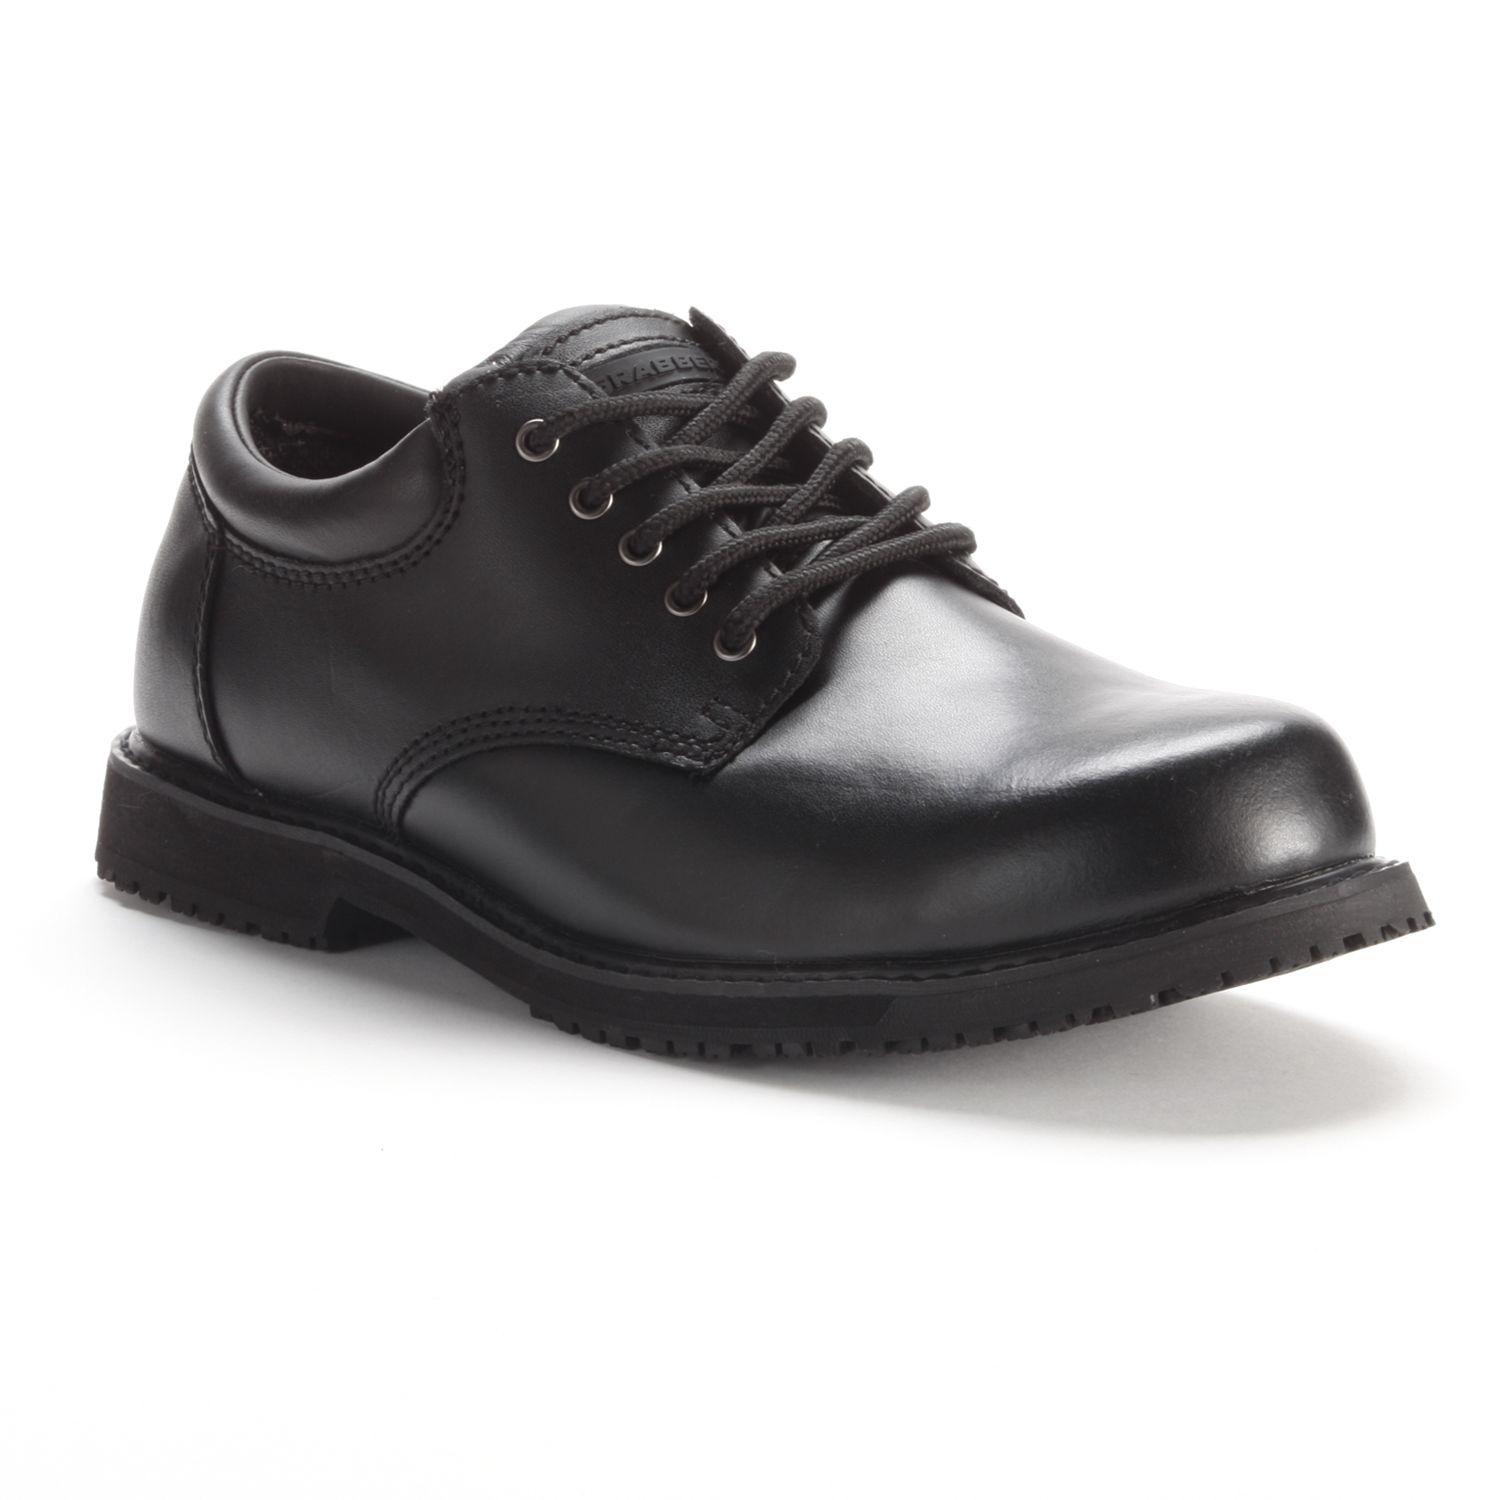 Slip-Resistant Oxford Work Shoes